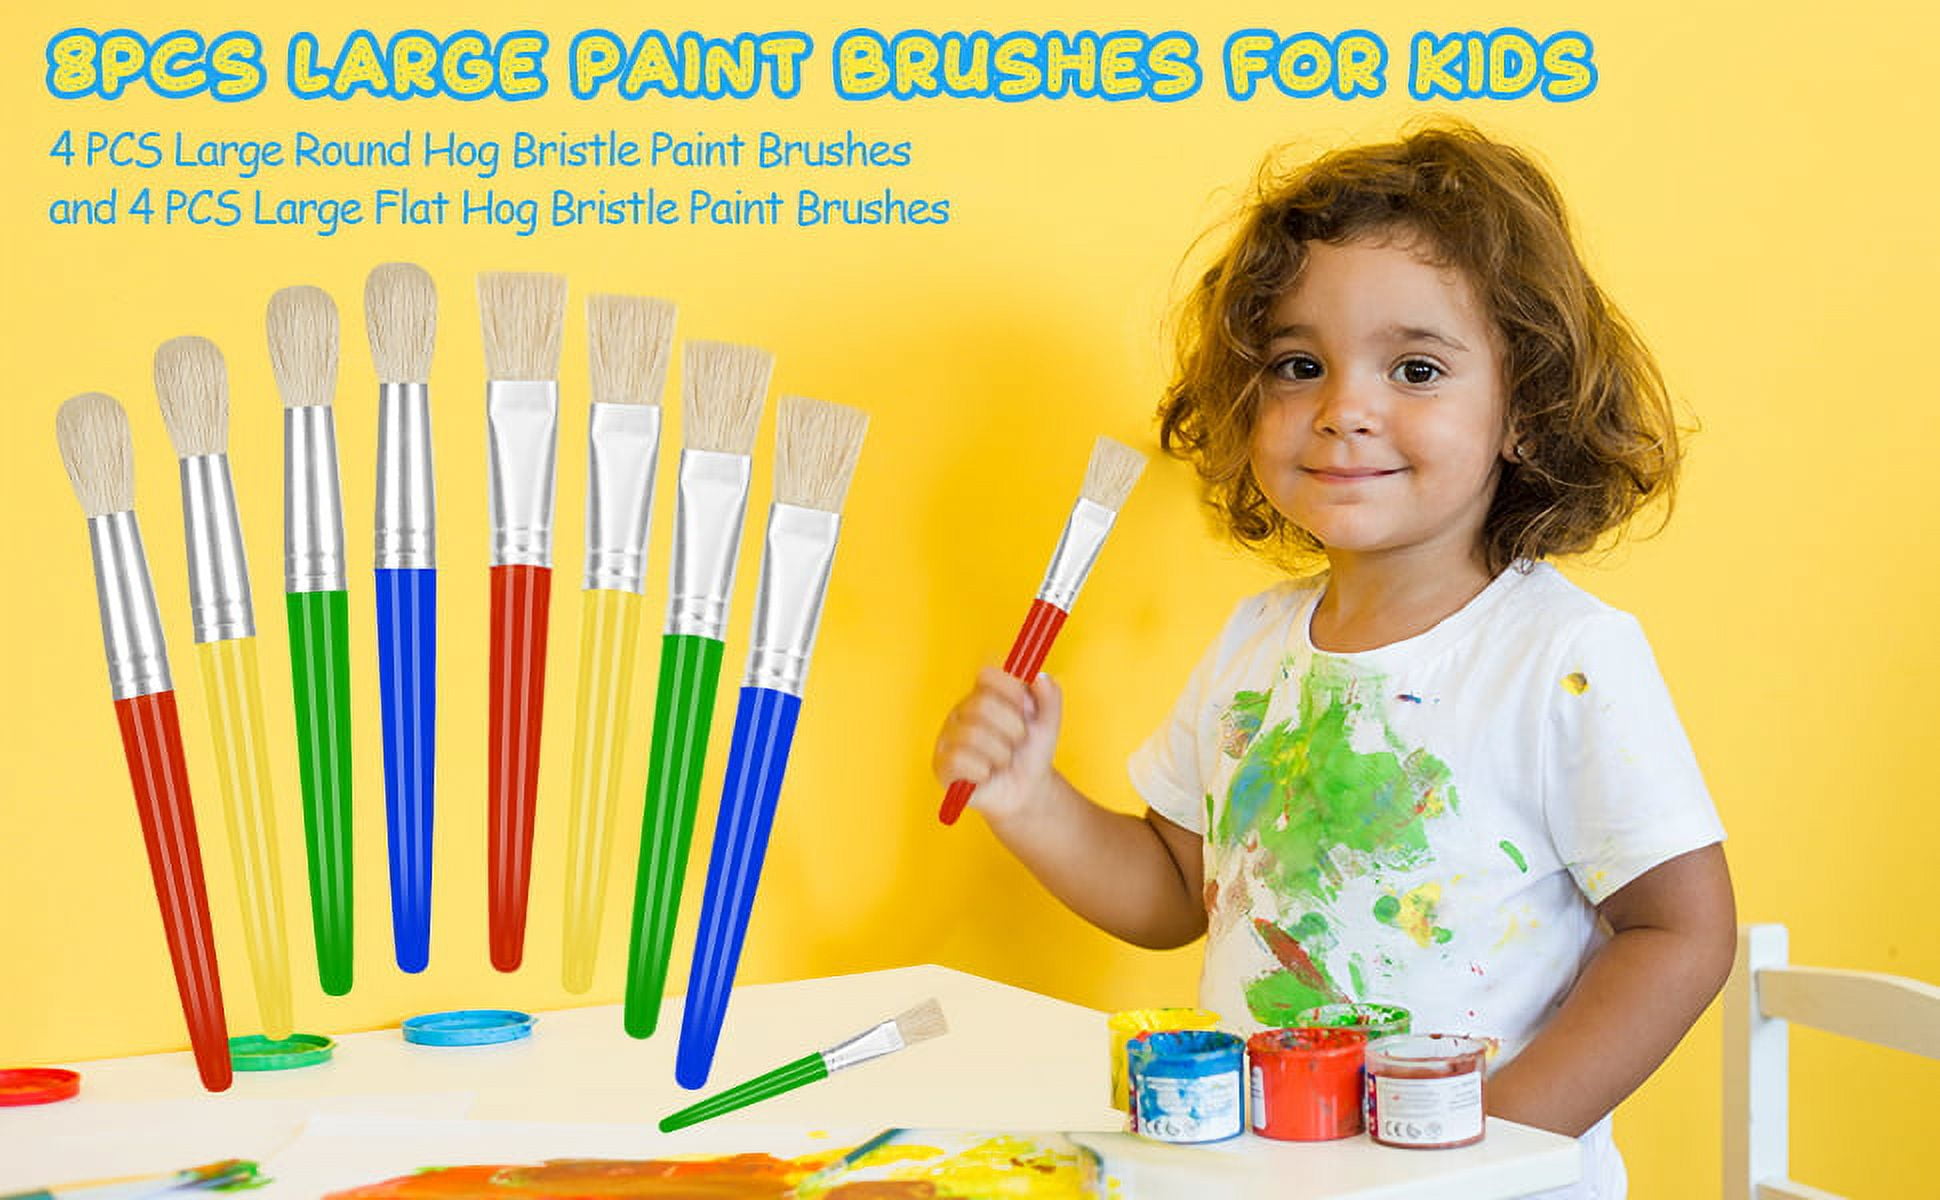 Generic Toddler Paint Brushes 24 Pack, Hog Bristle Round And Flat